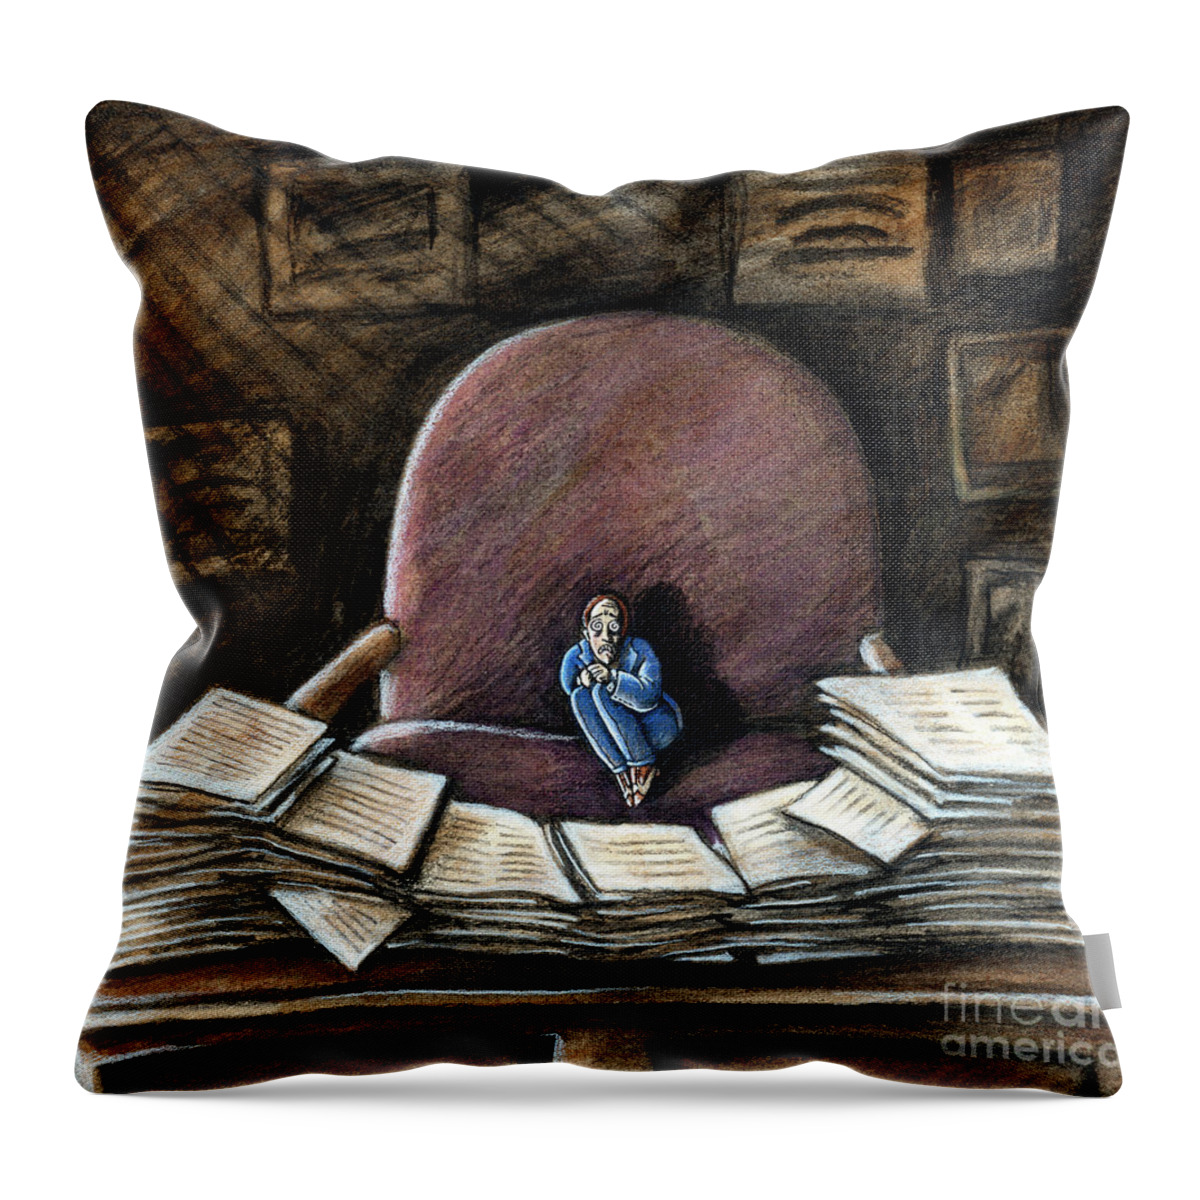 Work Throw Pillow featuring the drawing Work Anxiety by Valerie White